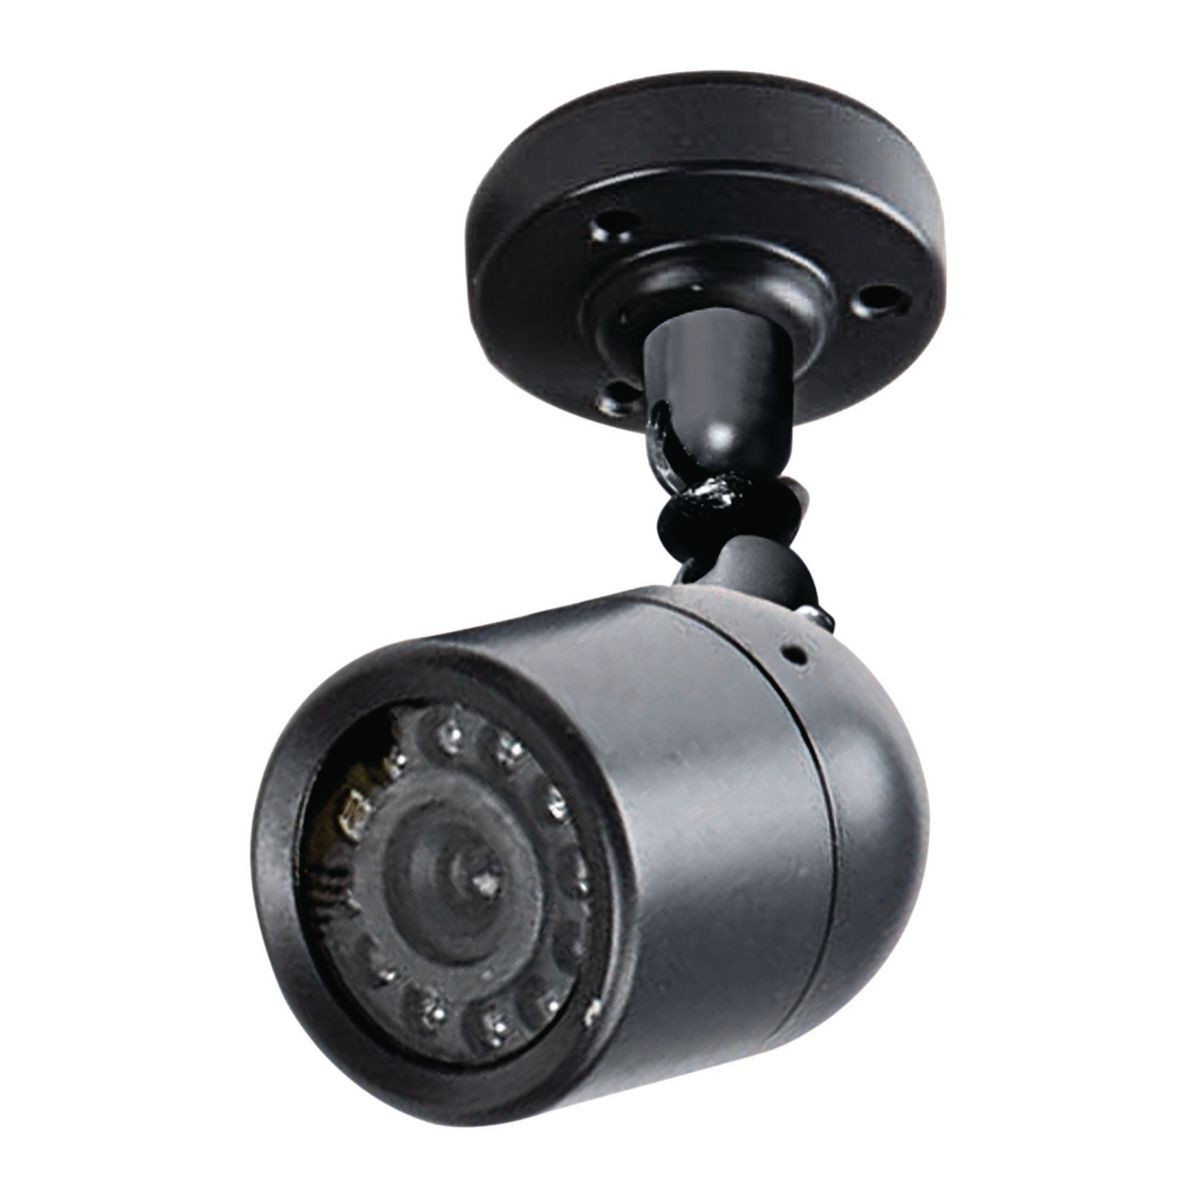 bunker hill wireless color security camera with night vision